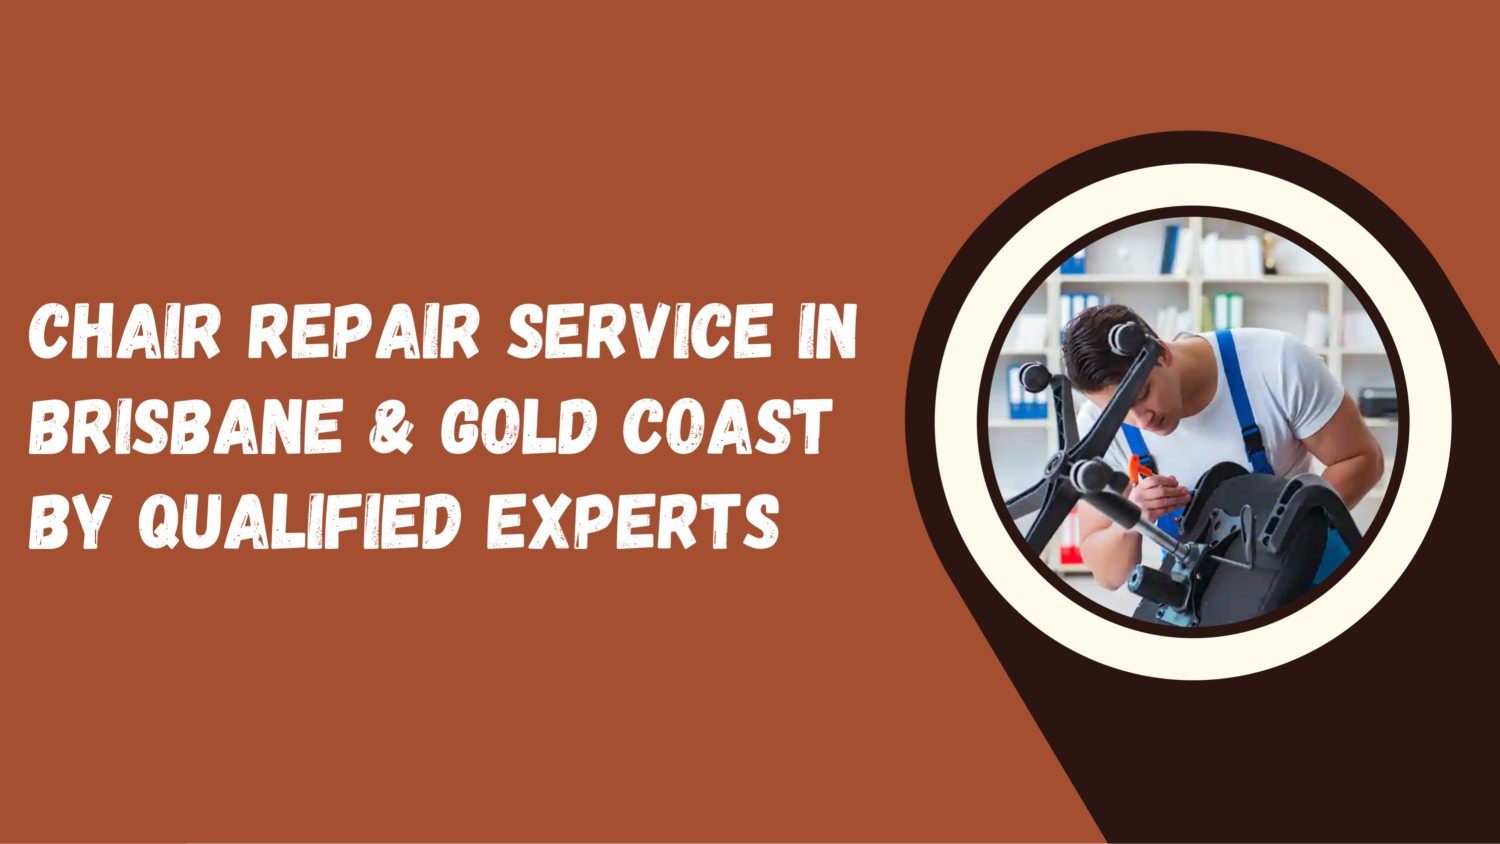 Chair Repair Service in Brisbane & Gold Coast by Qualified Experts